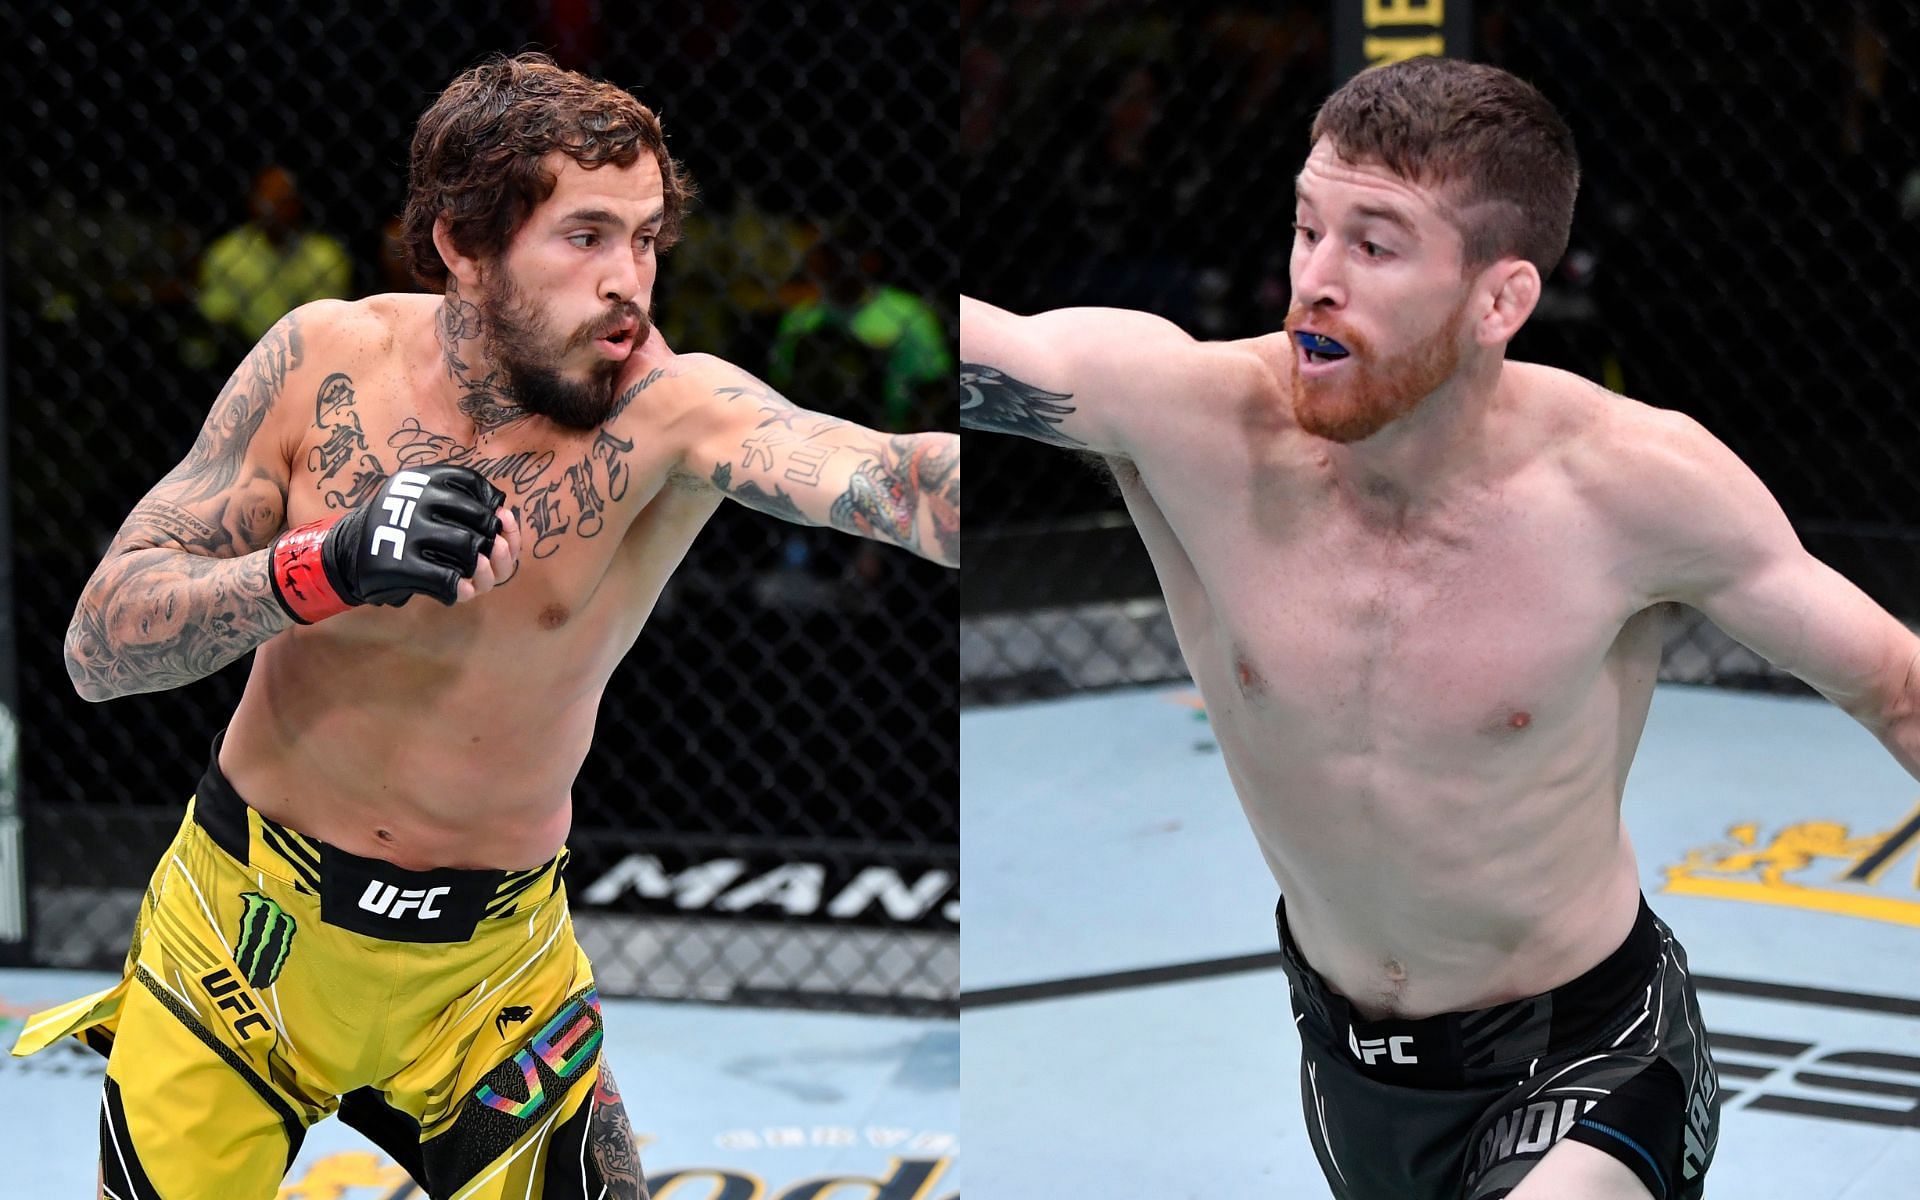 Marlon Vera (left) and Cory Sandhagen (right) are both heralded among the top strikers in the UFC bantamweight division today [Images courtesy: Getty Images]